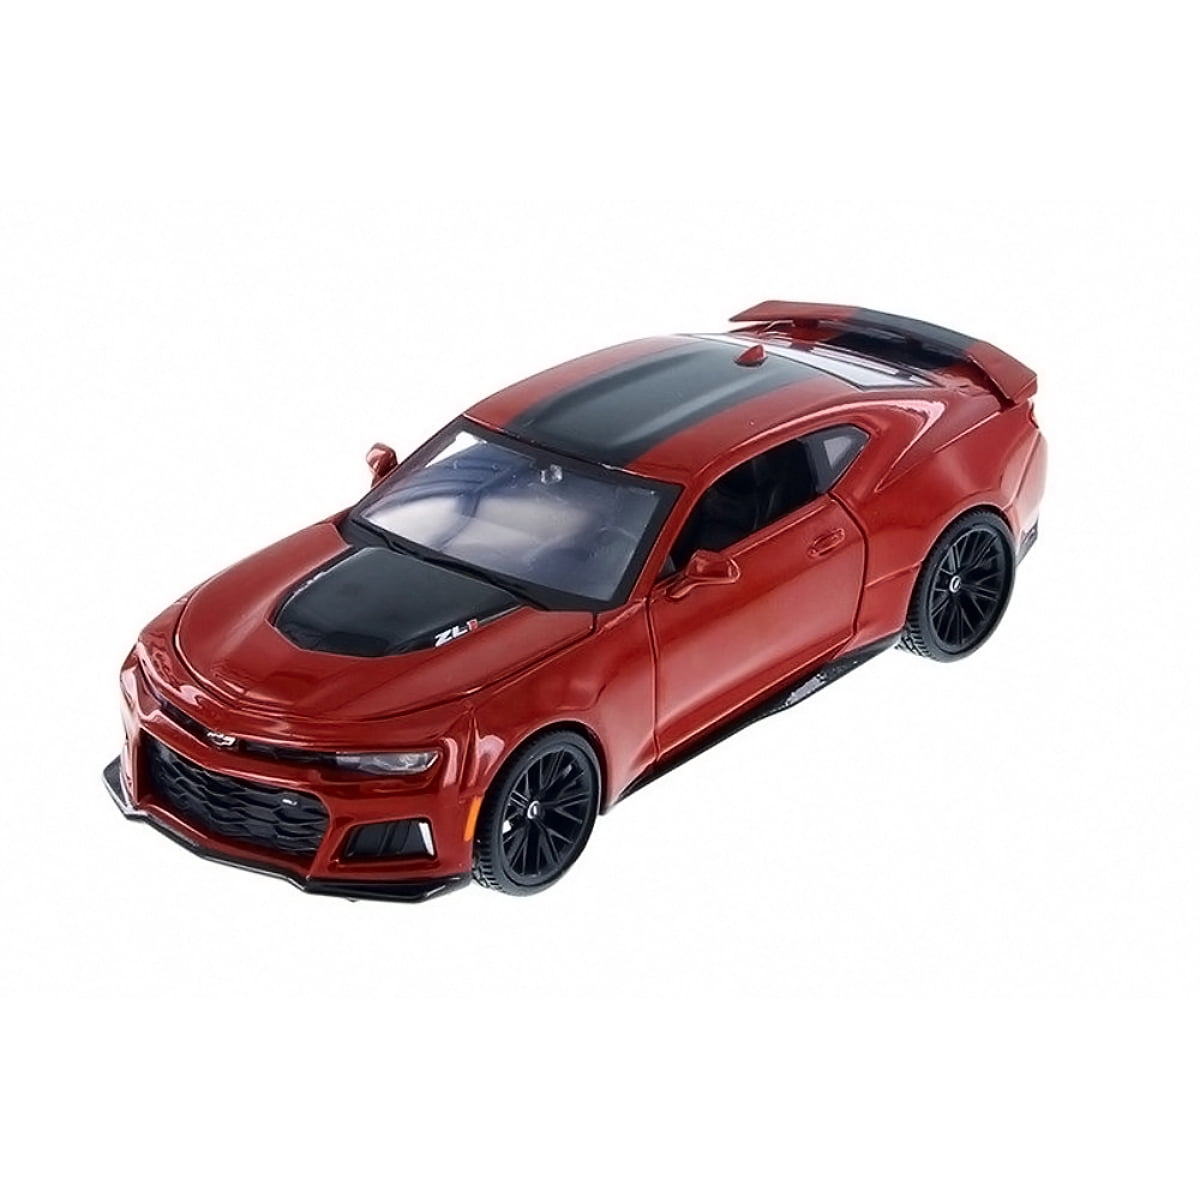 GREENLIGHT 2016 CHEVROLET CAMARO SS RED ALL NEW UNVEILING EDITION 1/64 CAR 29861 